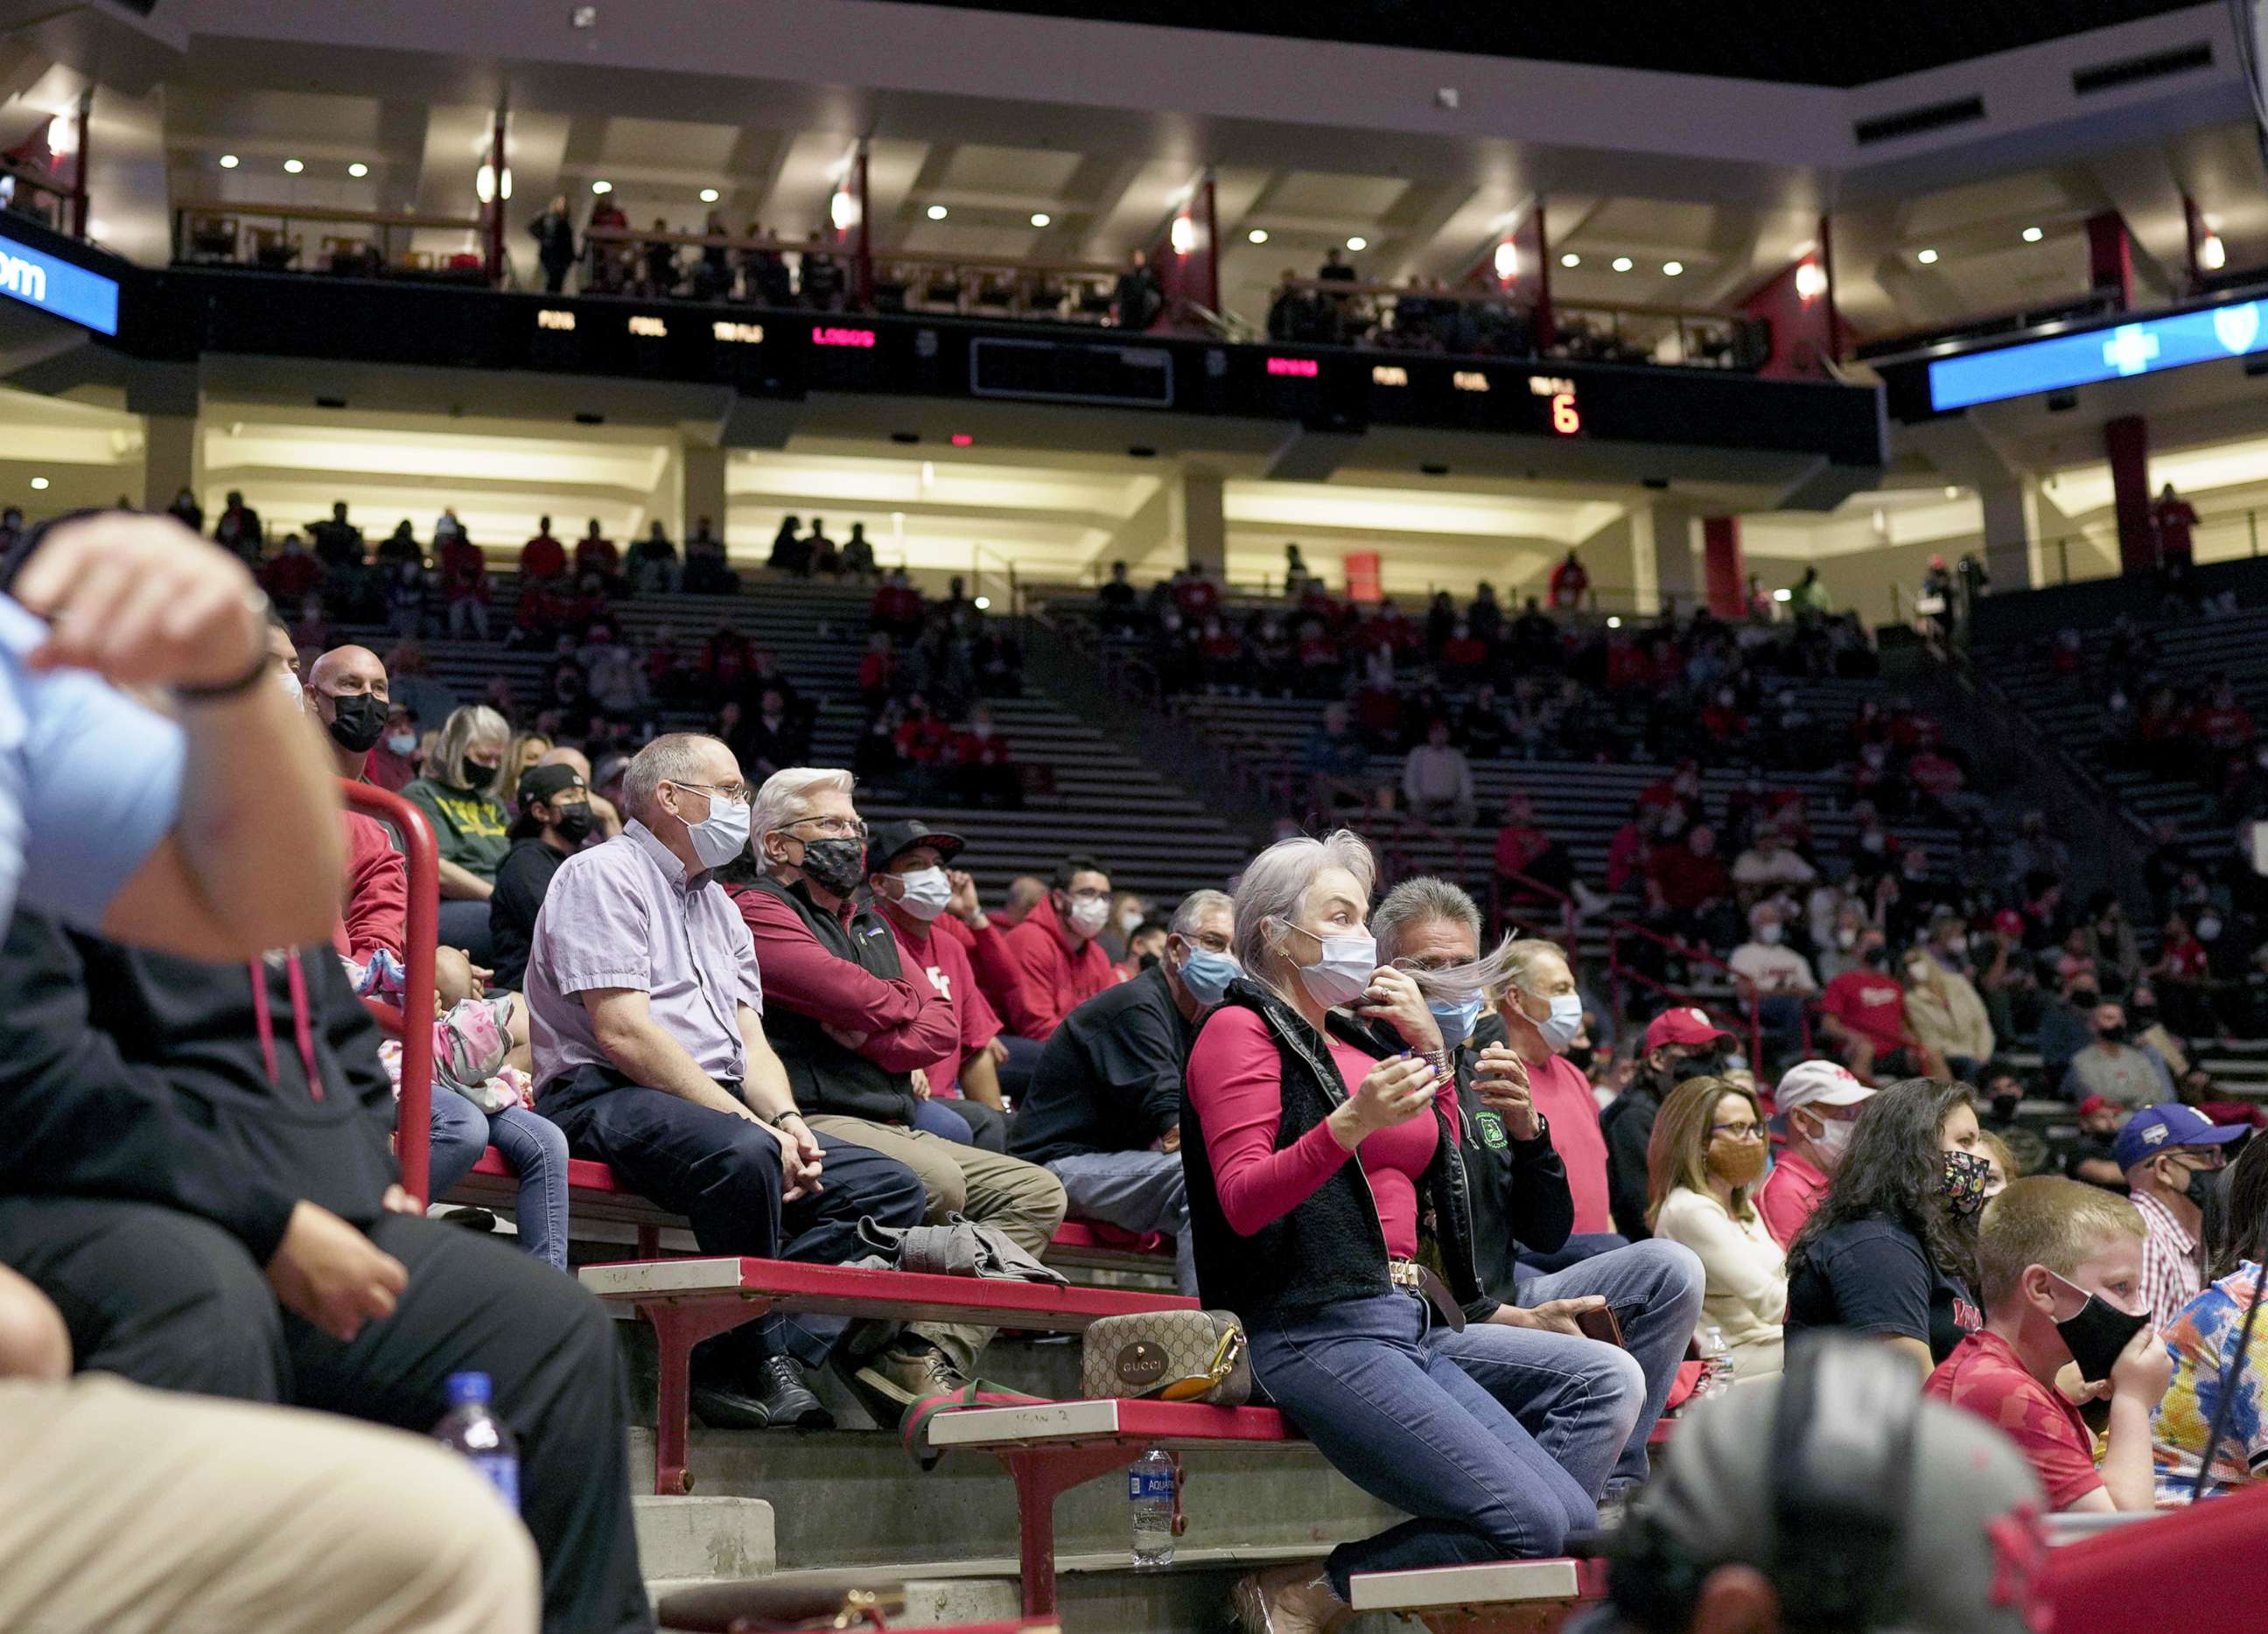 PHOTO: A crowd wearing Covid-19 protective masks attends the first Lobo men's basketball game of the season against New Mexico Highlands in Albuquerque, N.M., Nov. 5, 2021.